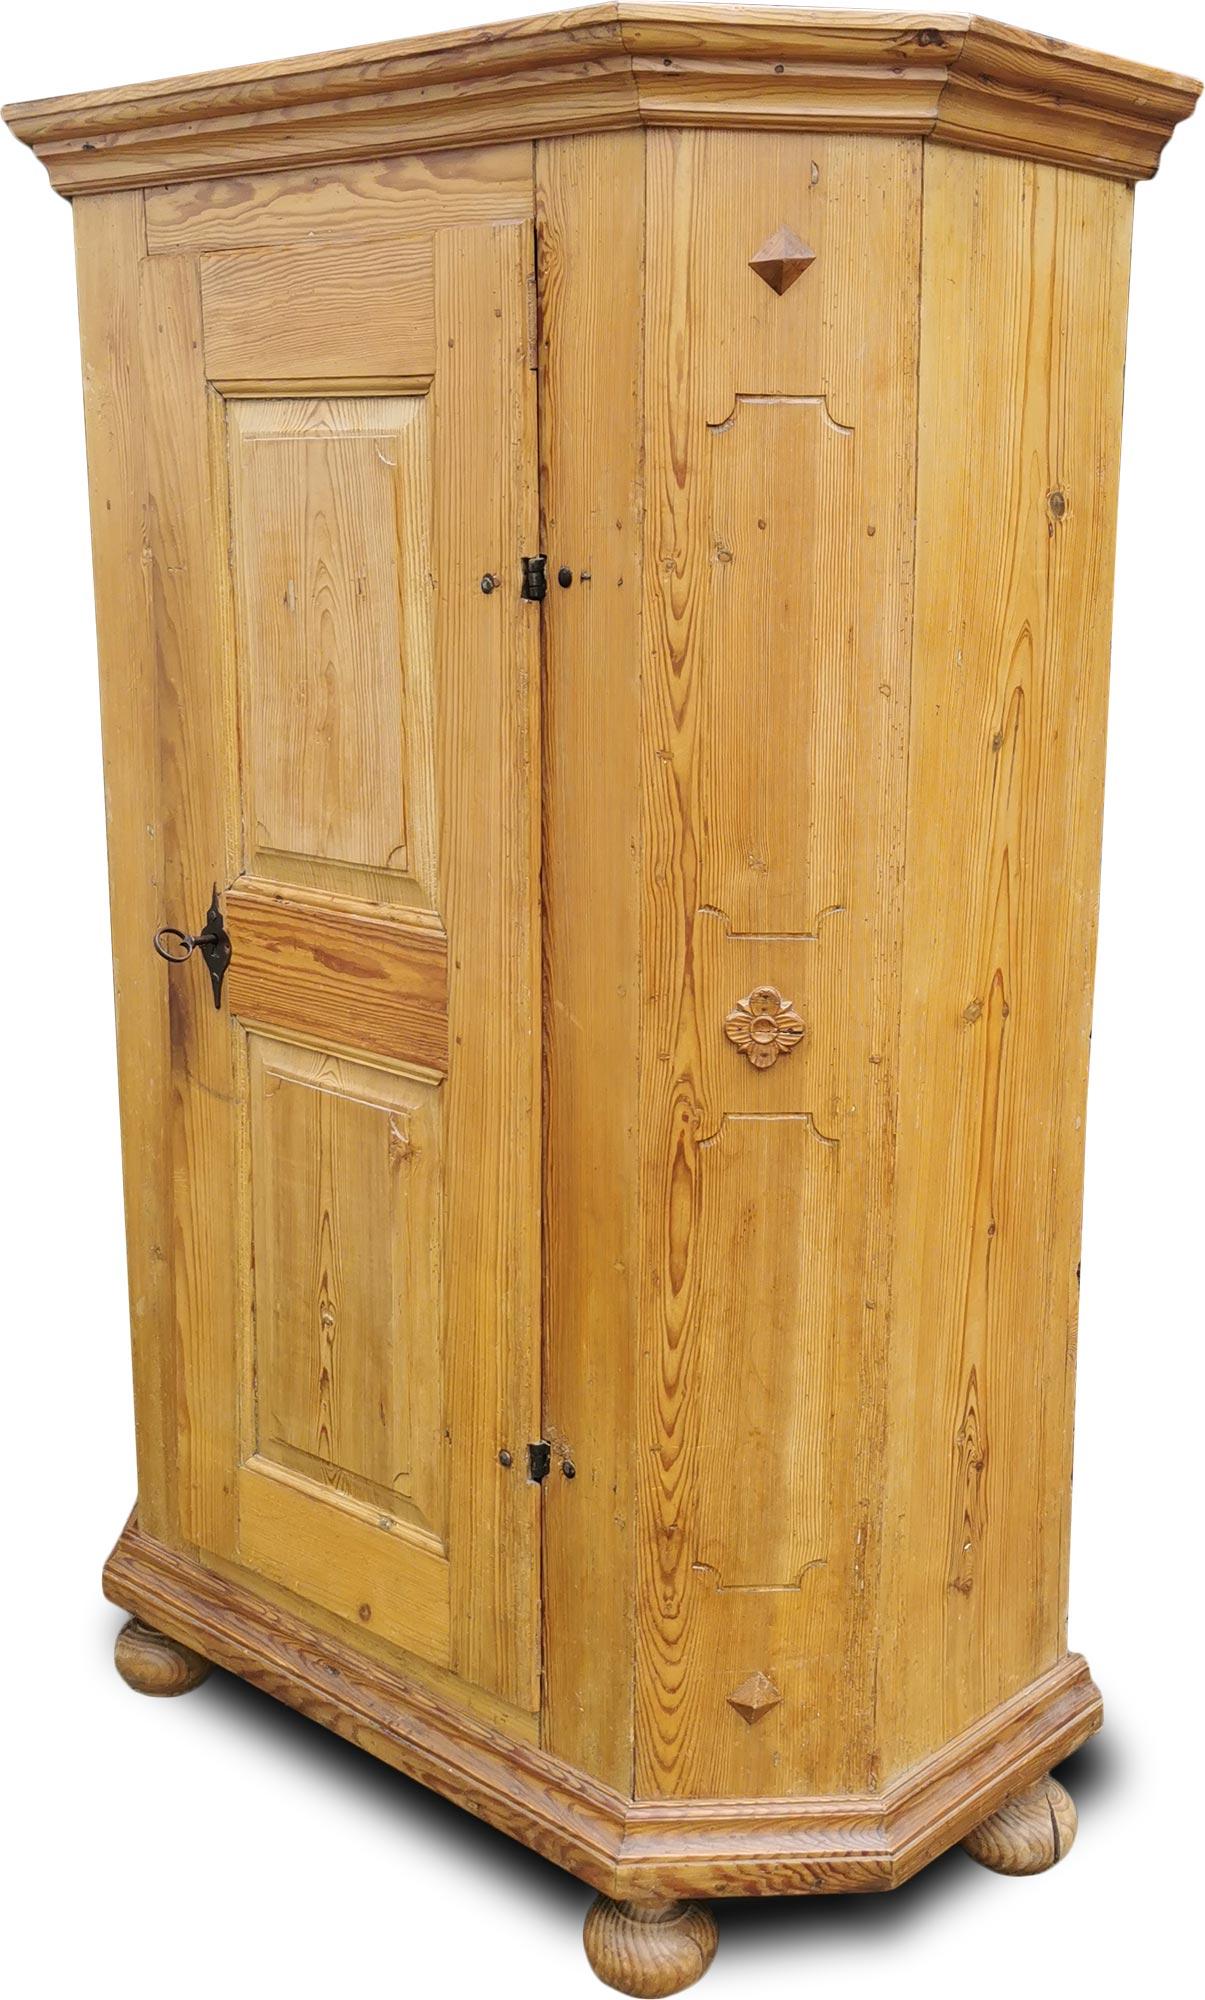 One-door wardrobe in fir from 1700

Measures: Height 185cm – Width 115cm (130 to the frames) – Depth 50cm (57 to the frames)

Spruce wardrobe, with one door, in excellent condition.
The door has two diamond mirrors, and a beautiful original and